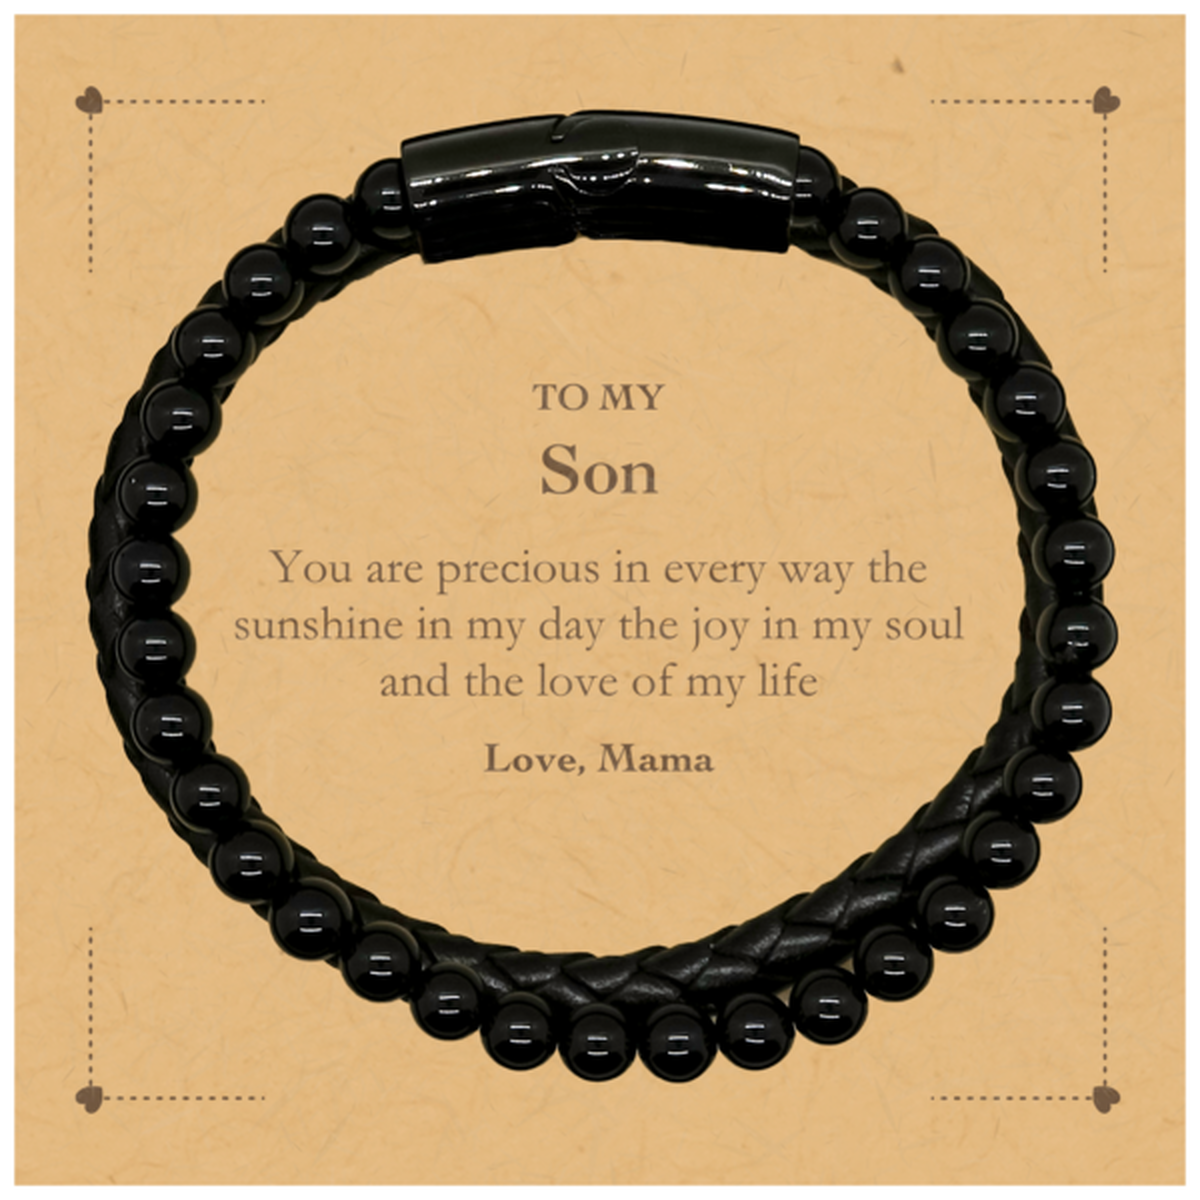 Graduation Gifts for Son Stone Leather Bracelets Present from Mama, Christmas Son Birthday Gifts Son You are precious in every way the sunshine in my day. Love, Mama